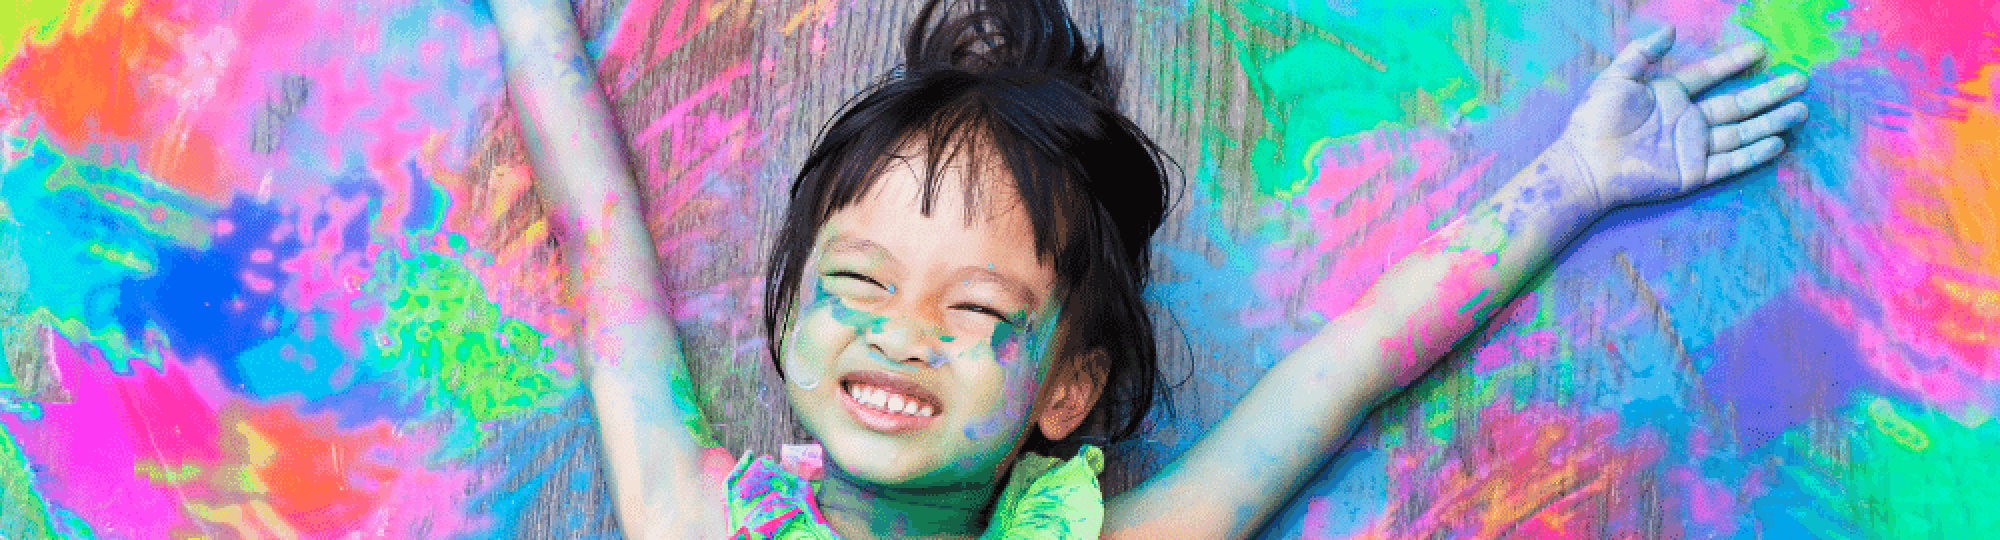 Girls Smiling with Paint Around Her